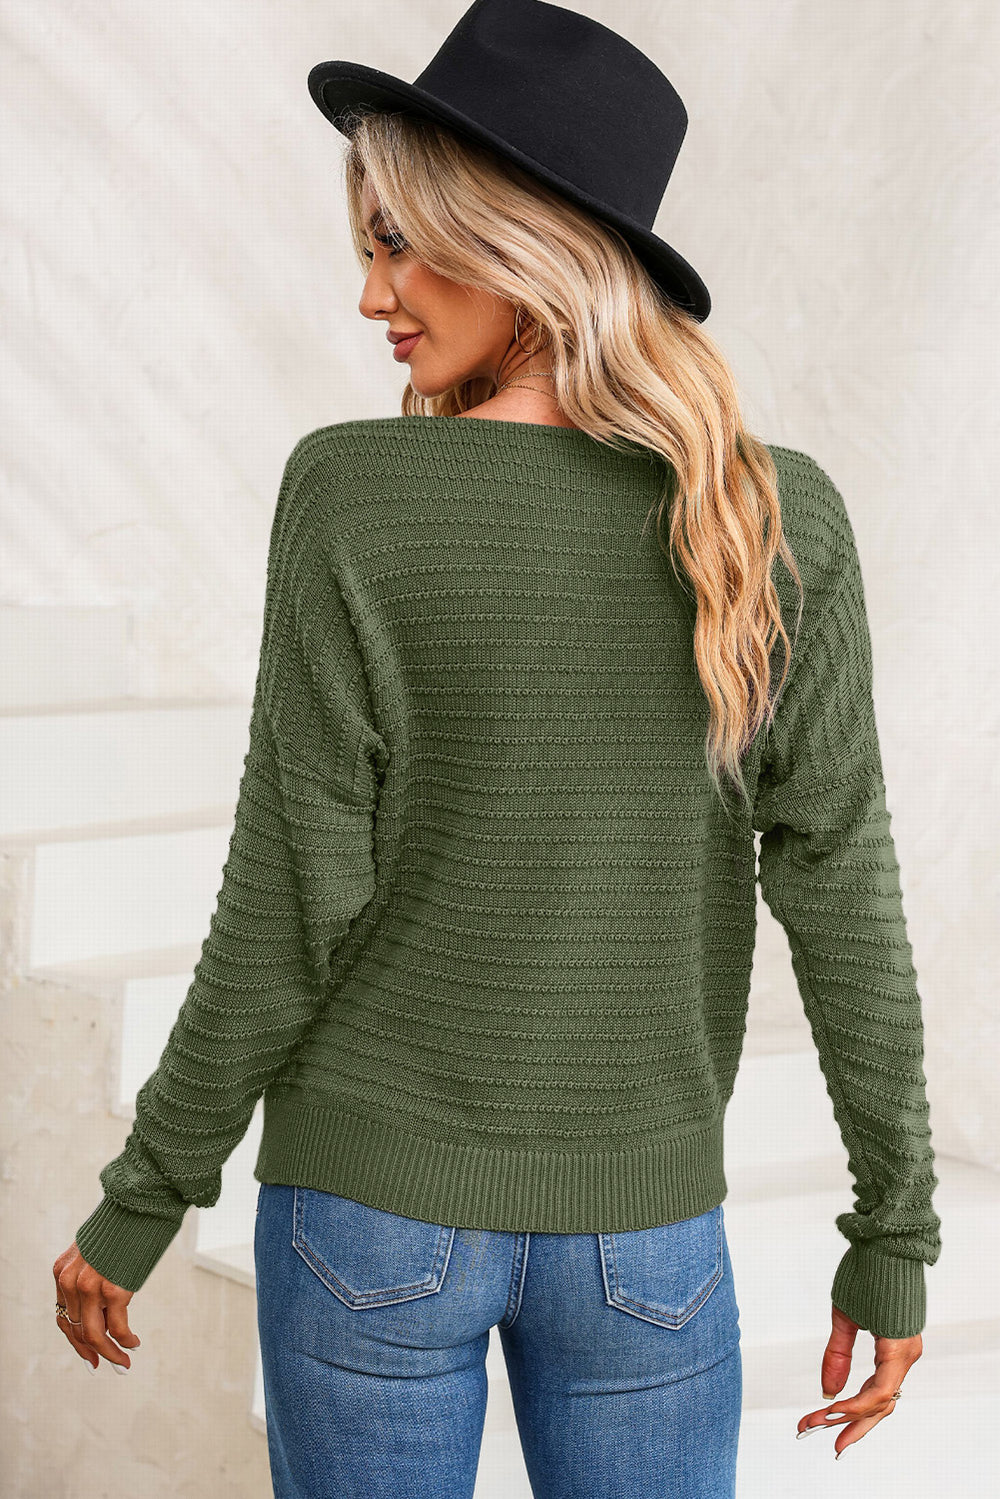 Womems - Green - Textured Knit Round Neck Dolman Sleeve Sweater